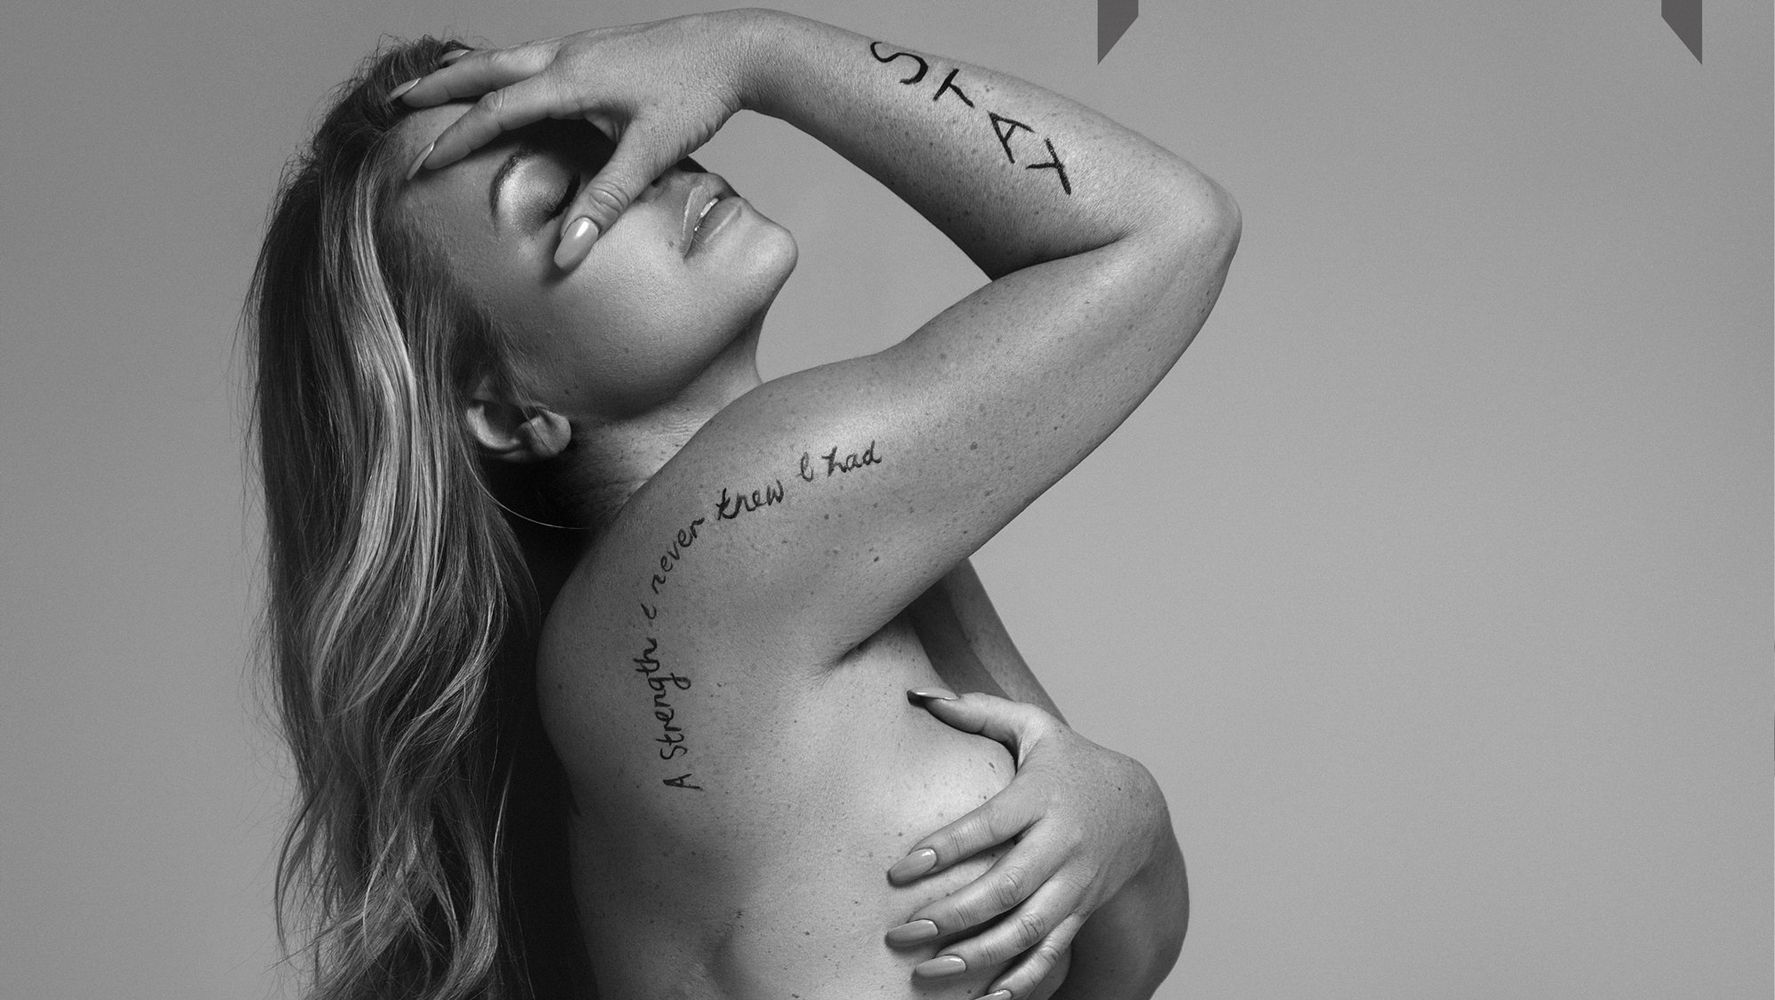 Reconstructive Tits - Anastacia Proudly Reveals Breast Cancer Scars In Empowering Nude Photoshoot  | HuffPost UK Life